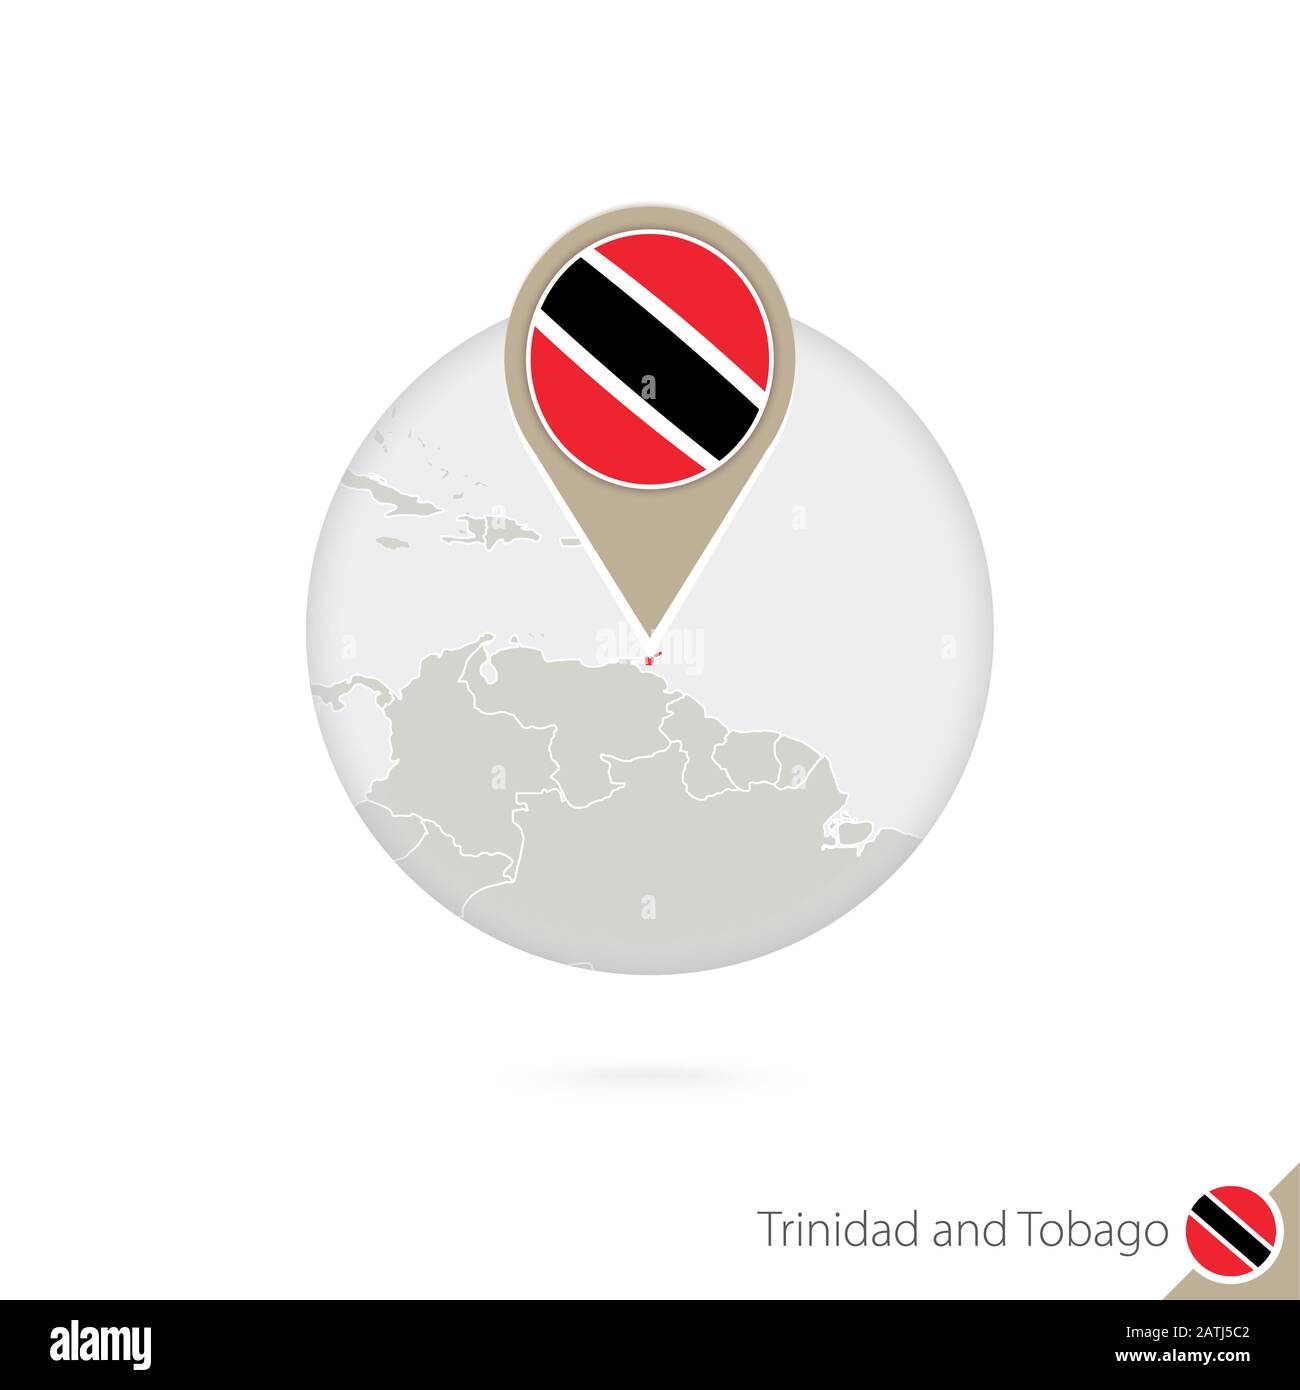 Trinidad and Tobago map and flag in circle. Map of Trinidad and Tobago, Trinidad and Tobago flag pin. Map of Trinidad and Tobago in the style of the g Stock Vector